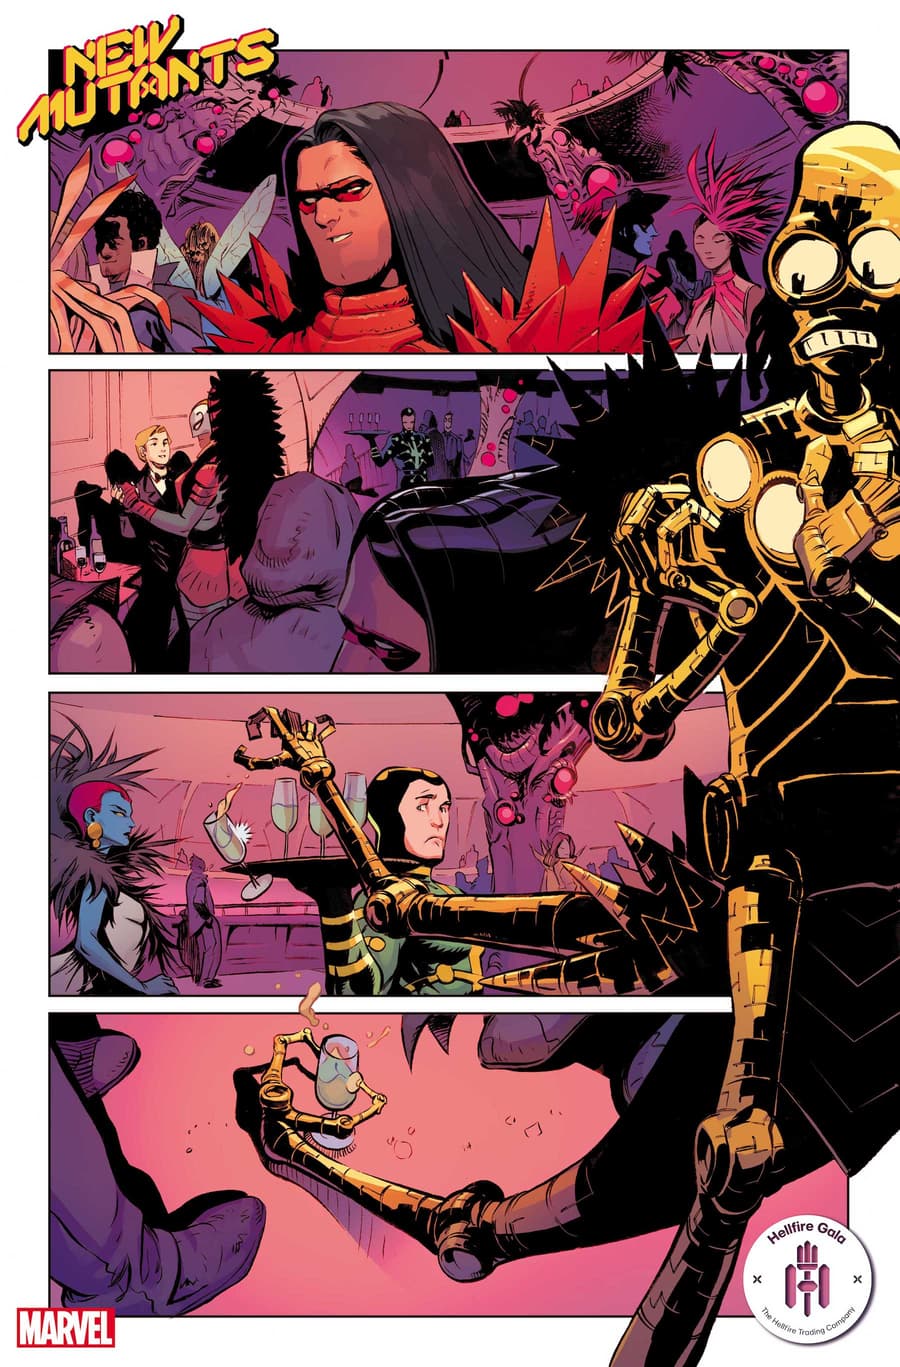 NEW MUTANTS #19 preview art by Alex Lins with colors by Matt Milla